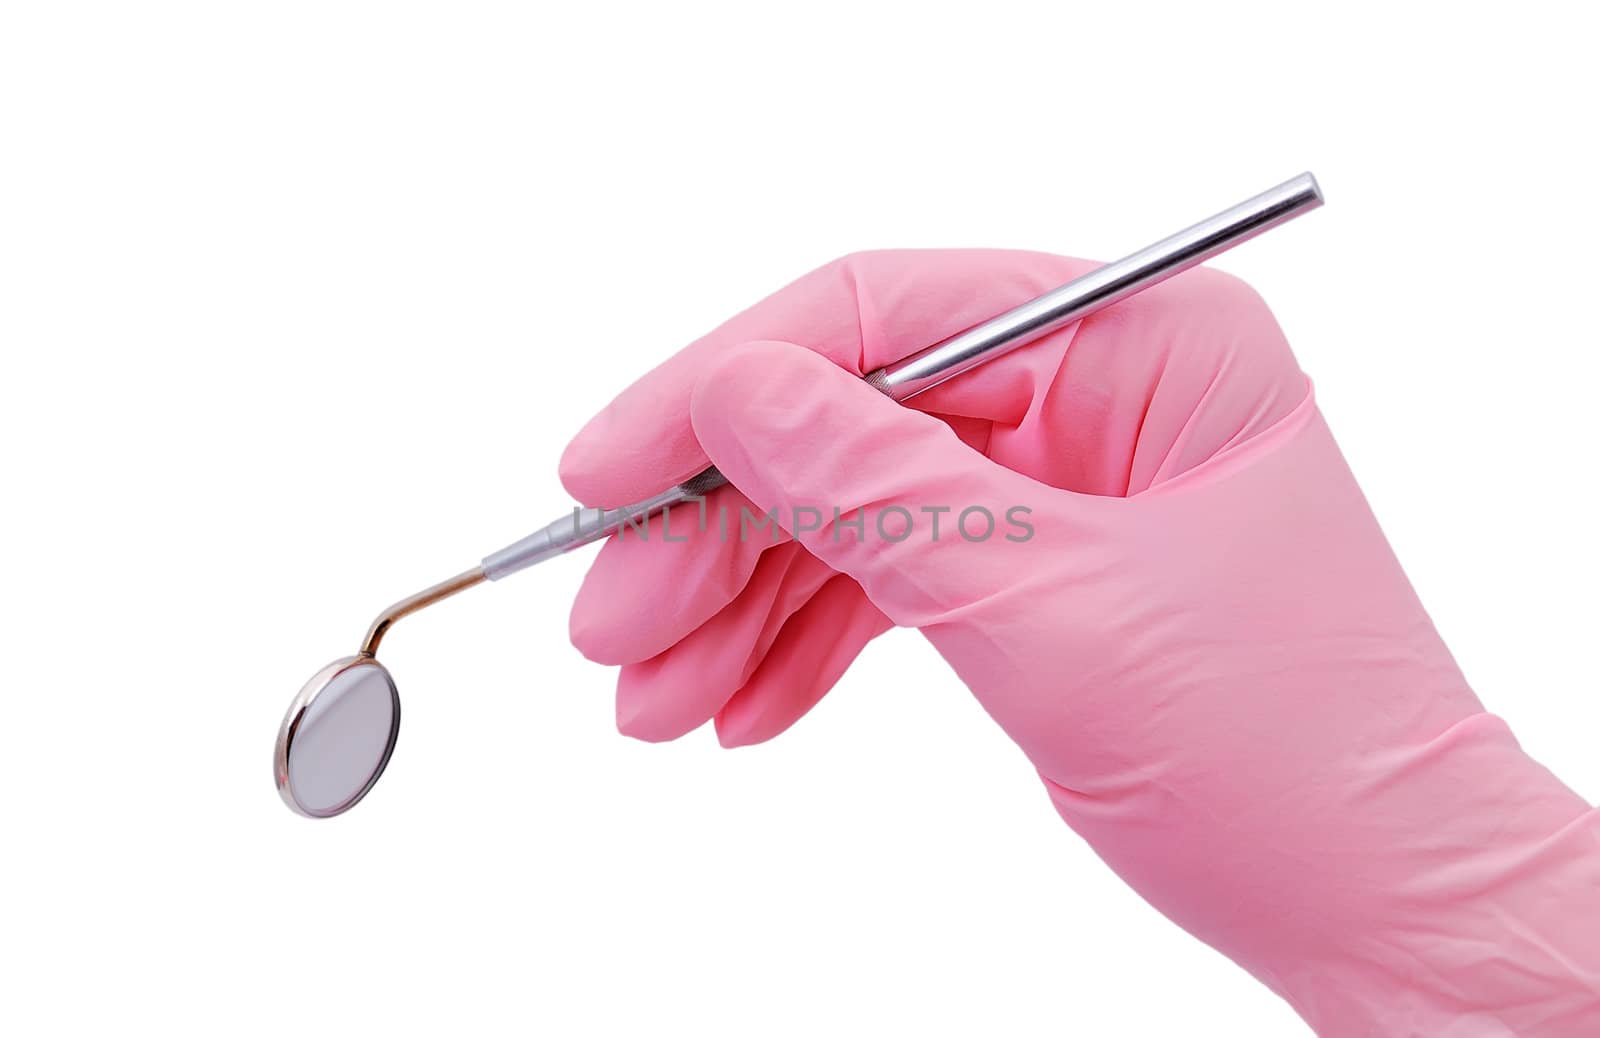 dental mirror in hand with a doctor in a pink glove